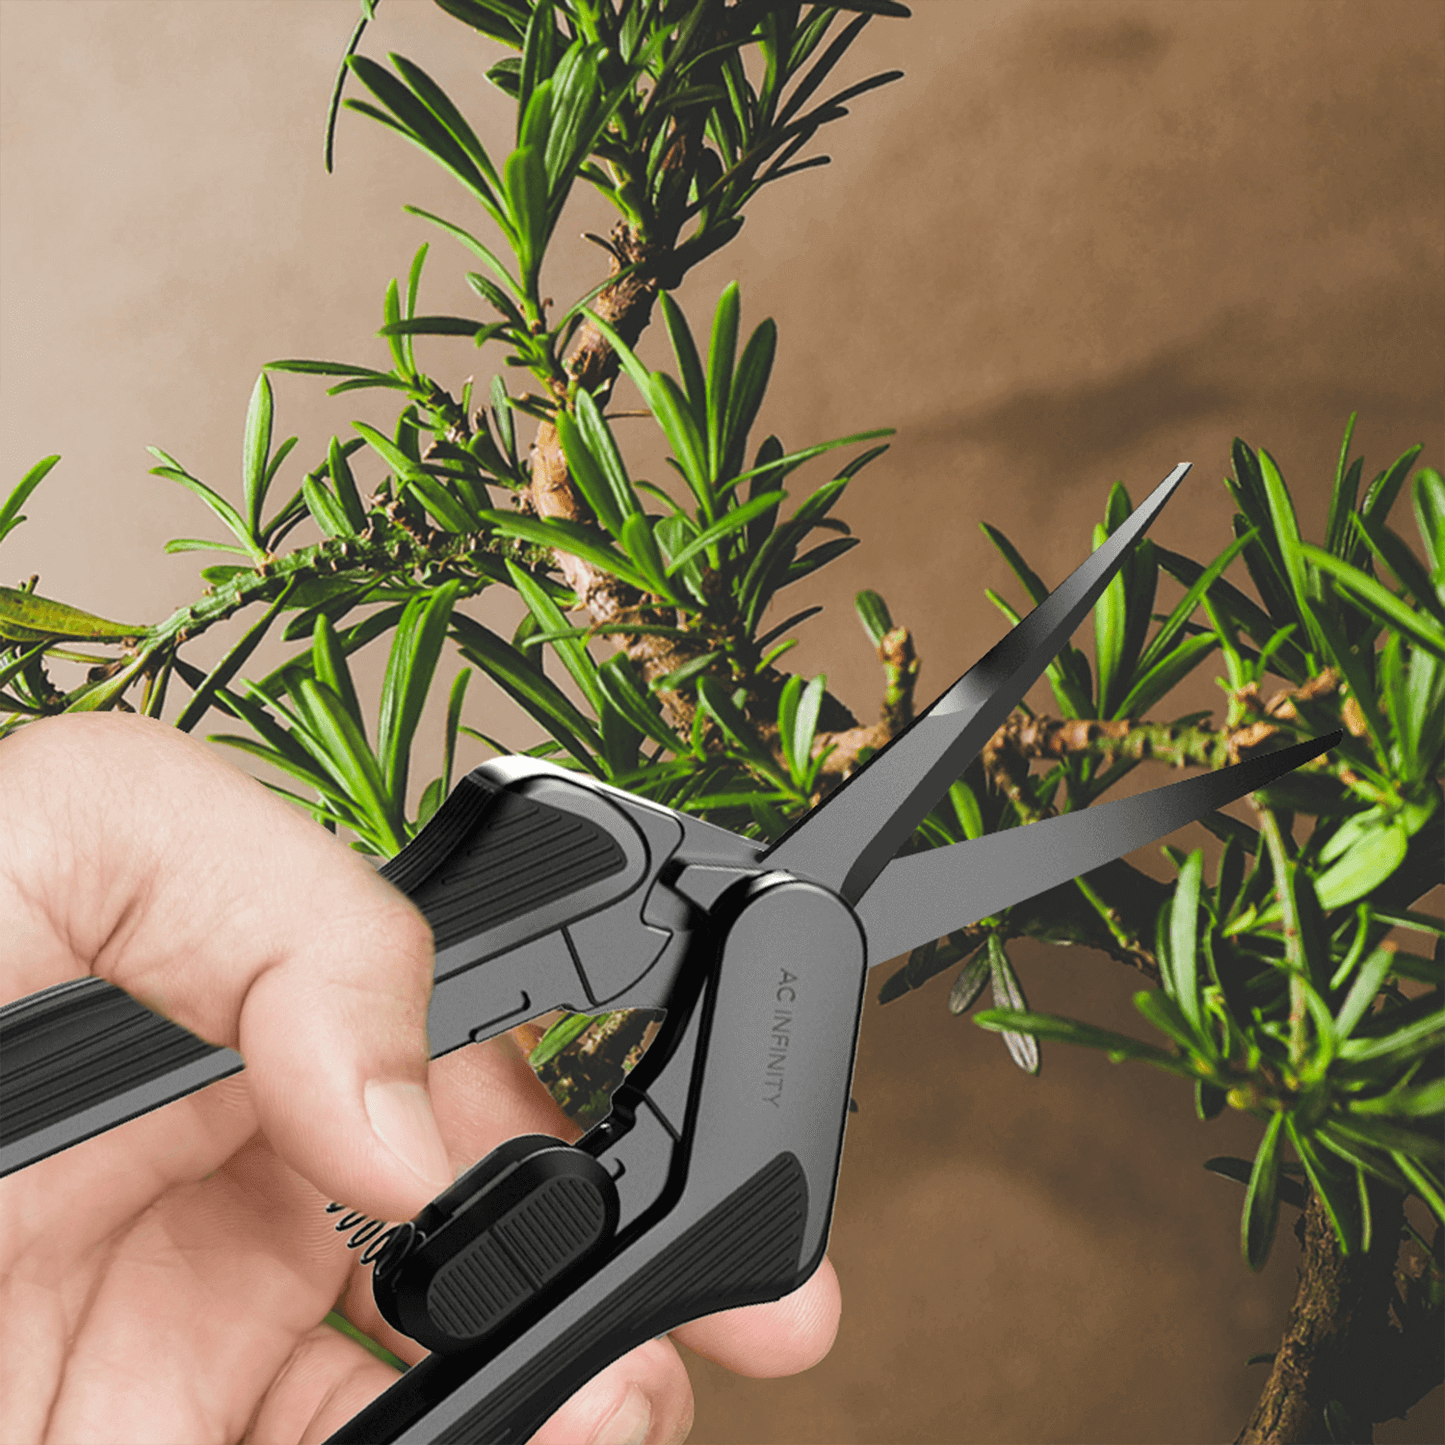 AC Infinity Stainless Steel Curved Pruning Shear, Ergonomic Lightweight, 6.6" Blades, 2-Pack | AC-PSC3X2 | Grow Tents Depot | Harvest & Extraction | 819137023512